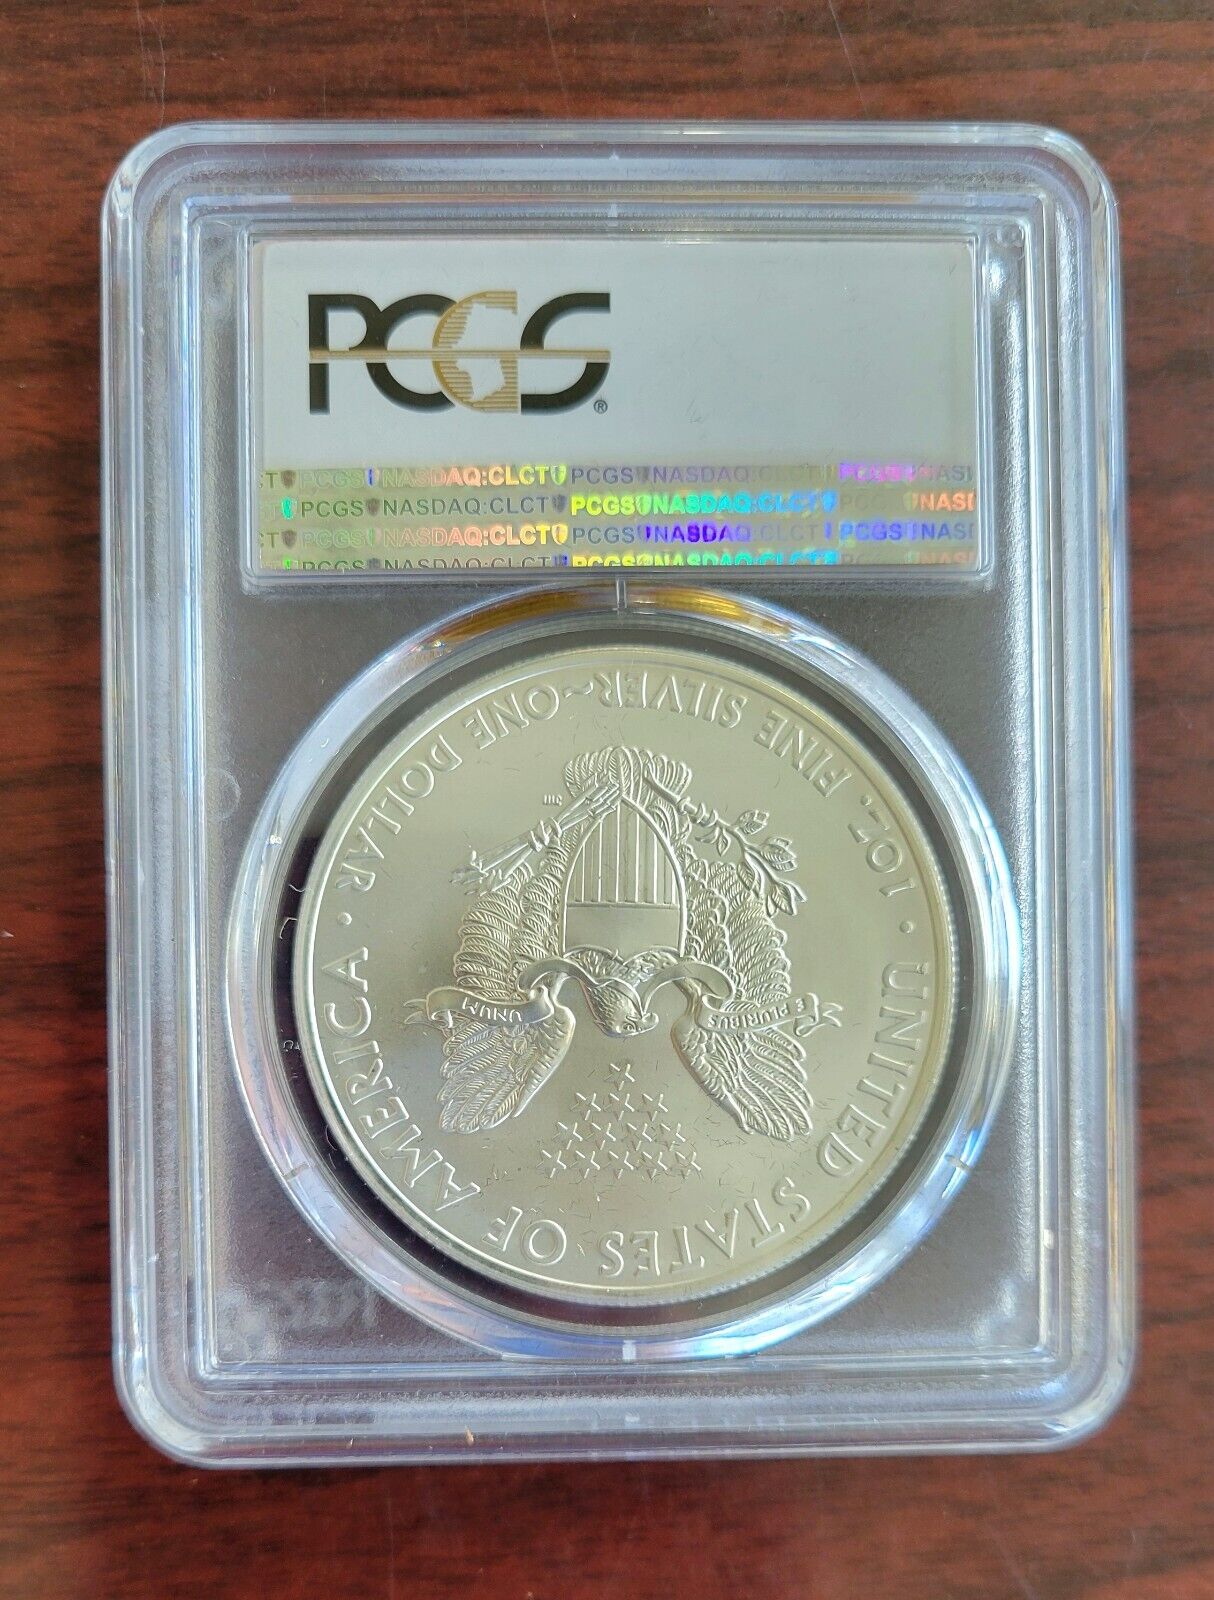 2012-(S) American Silver Eagle - PCGS MS69 Struck at San Francisco Red Label